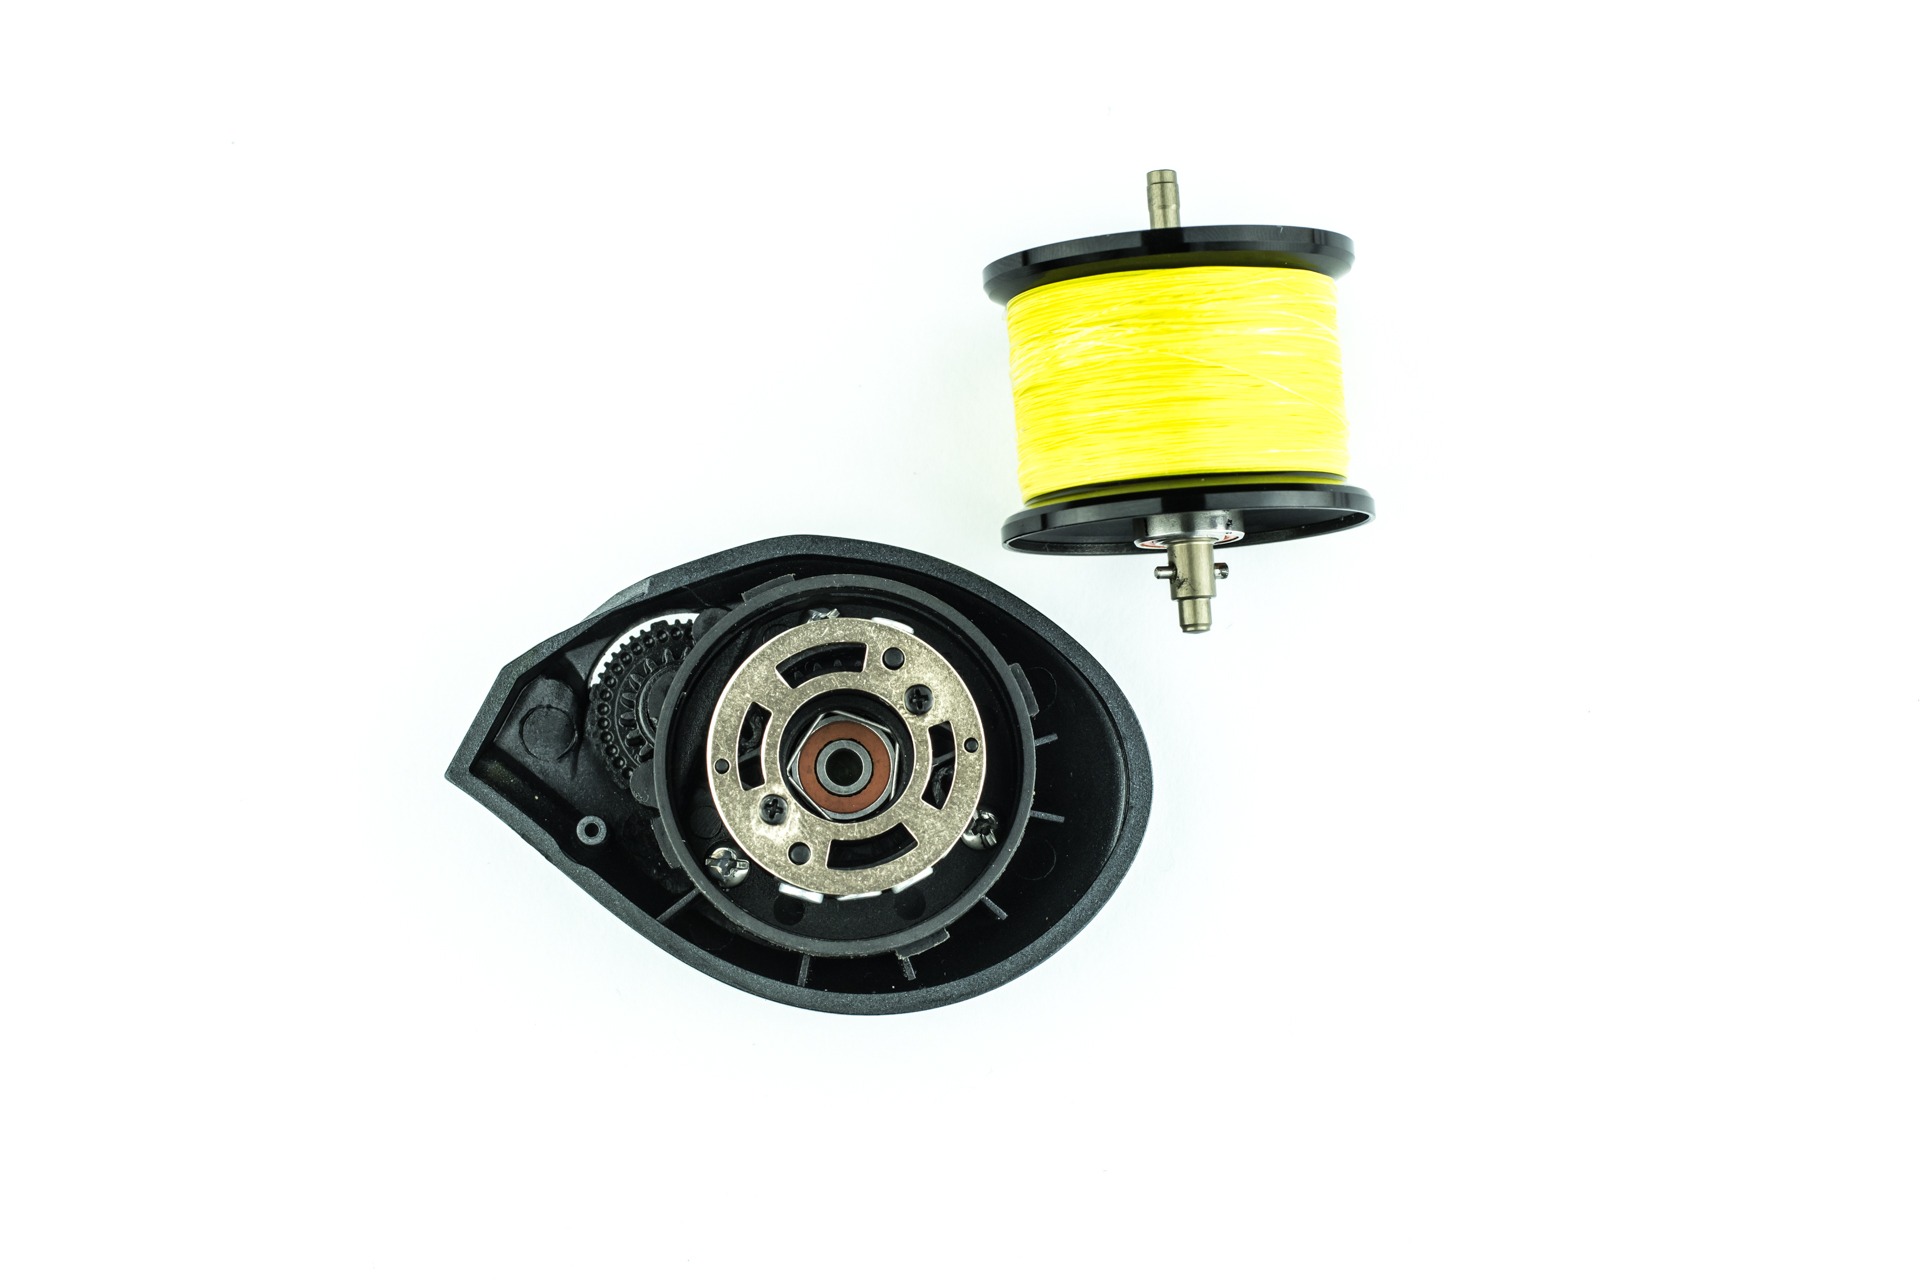 Fishband GH100 BFS Reel: Buyer's Guide & How to Upgrade the Bearings